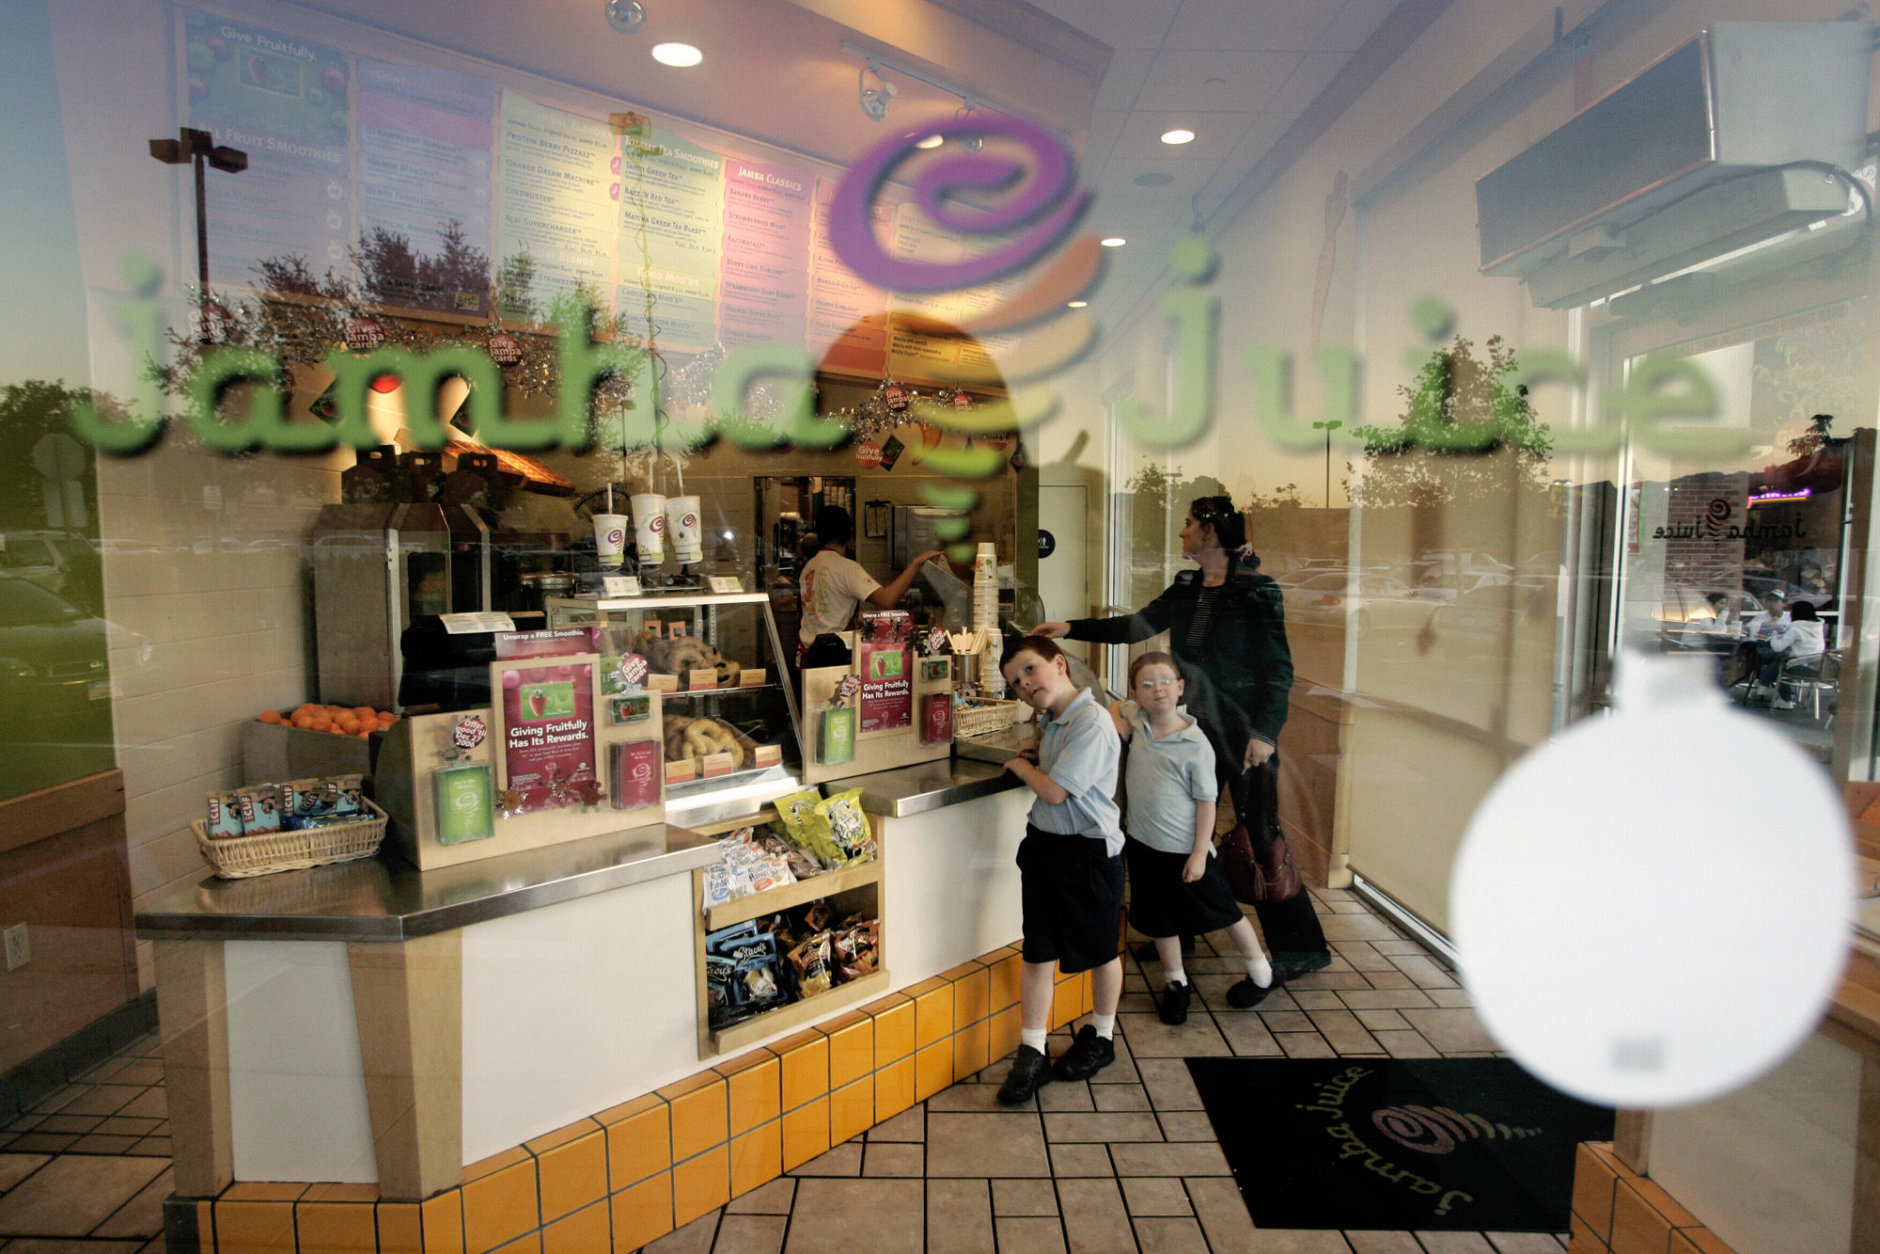 Sean Hovland, left, and his brother Andrew, 6, wait for their order at a Jamba Juice store in Glendale, Calif., Tuesday, Dec,. 5, 2006. Jamba Juice Co. warned consumers Tuesday that a potentially deadly bacterium may have contaminated smoothies that contain strawberries. The warning, released in consultation with the U.S. Food and Drug Administration, applies to smoothies sold at Jamba Juice stores in Arizona, Southern Nevada and Southern California between Nov. 25 and Dec. 1. (AP Photo/Damian Dovarganes)